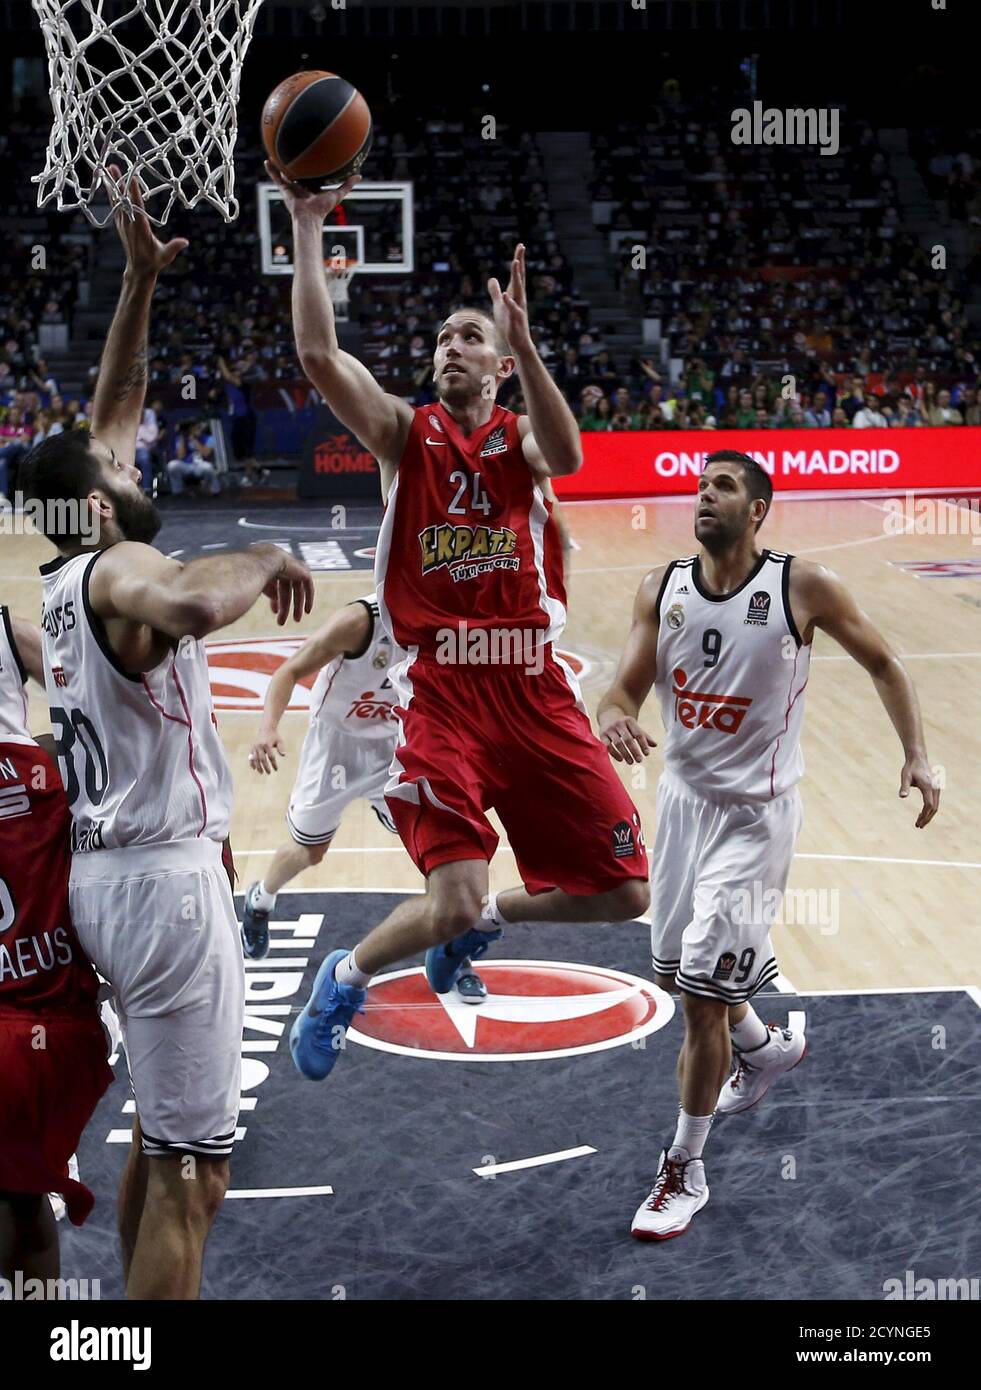 Olympiakos' Matt Lojeski (C) goes up for a basket between Real Madrid's  Felipe Reyes (R) and Ioannis Bourousis during their Euroleague Final Four  final basketball game in Madrid, Spain, May 17, 2015.